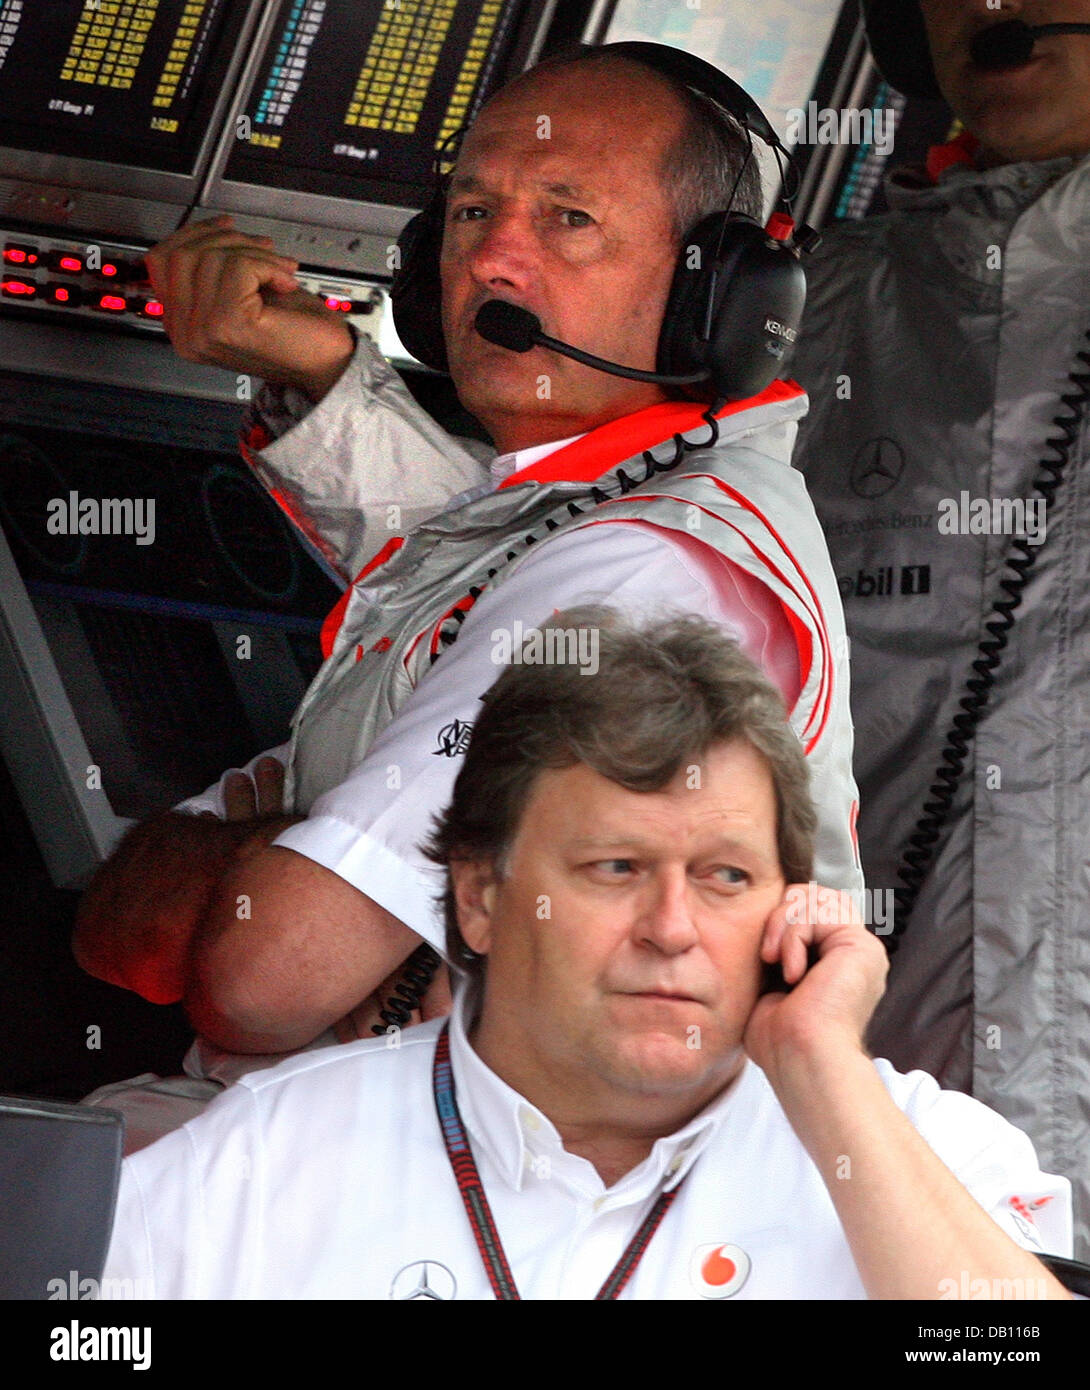 British Ron Dennis (back), team principal of McLaren Mercedes, and German Norbert Haug (front), Mercedes Motorsport Director, during the wet first practice session at the Carlos Pace race circuit in Interlagos near Sao Paulo, Brazil, 19 October 2007. McLaren Mercedes' rookie driver, Briton Lewis Hamilton, could become the first-ever rookie Formula One World Champion when the decisi Stock Photo